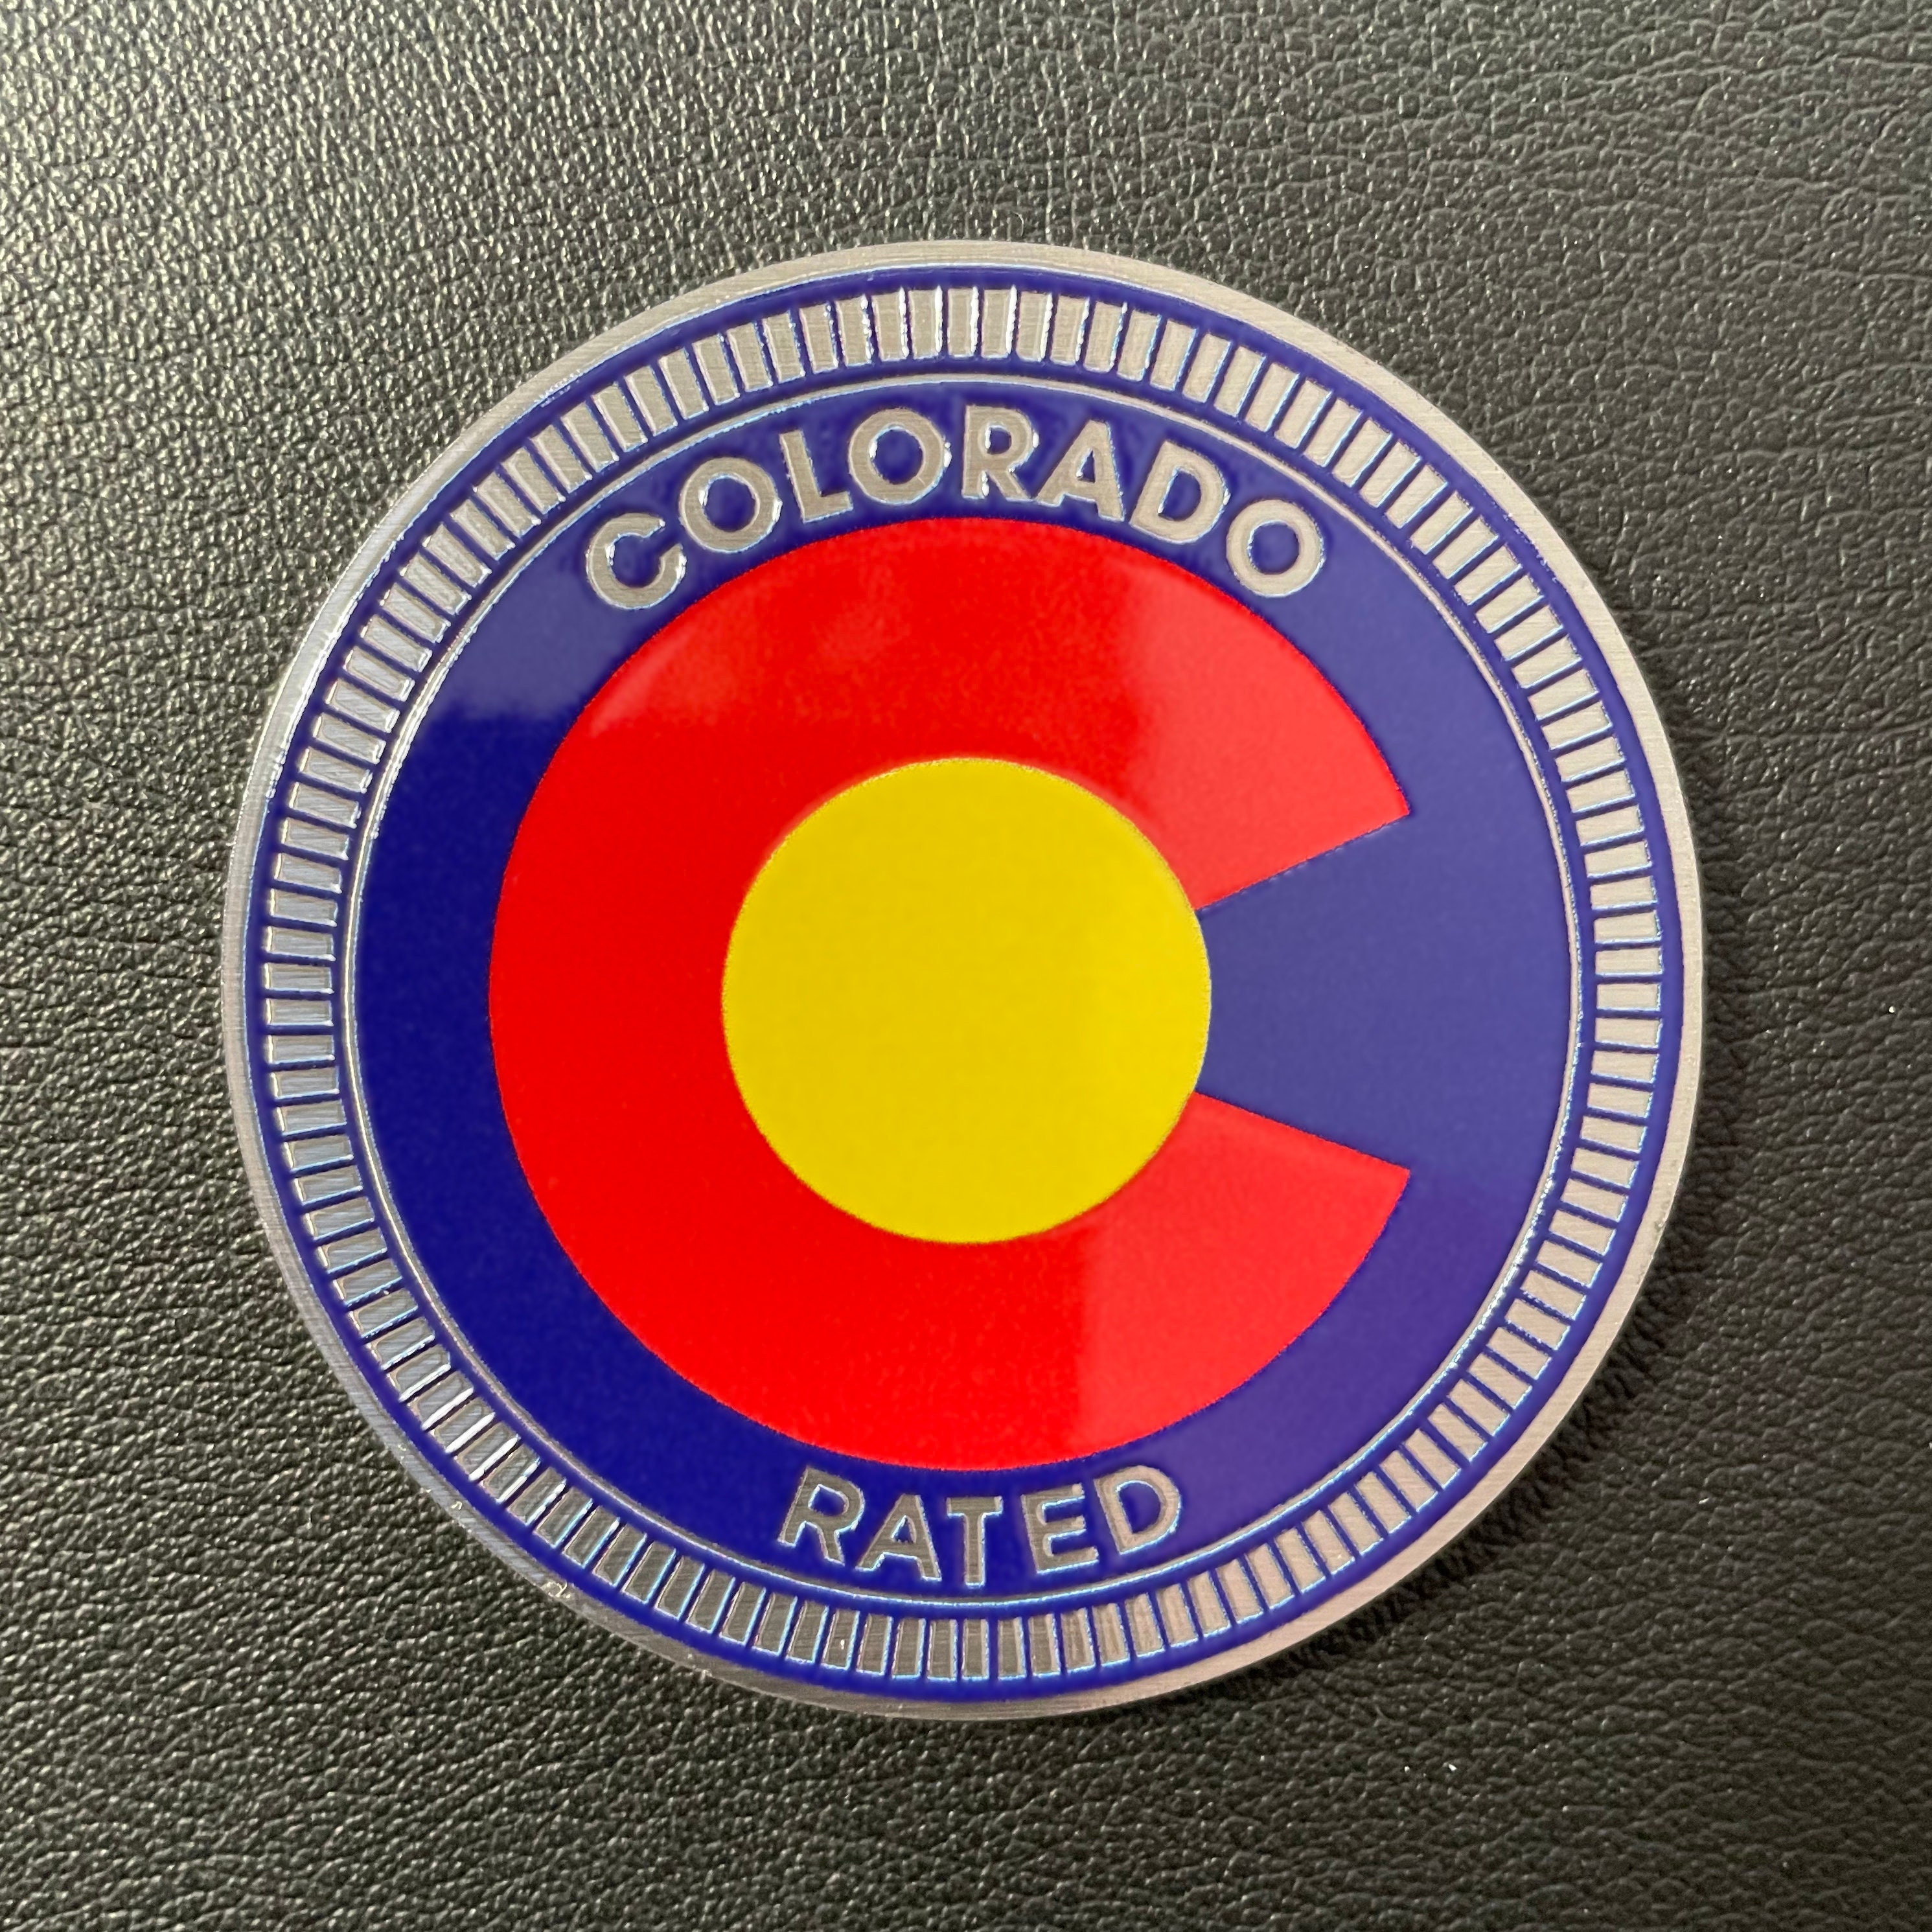 Metal Colorado Rated Badge for Jeep and Trail Rated or not